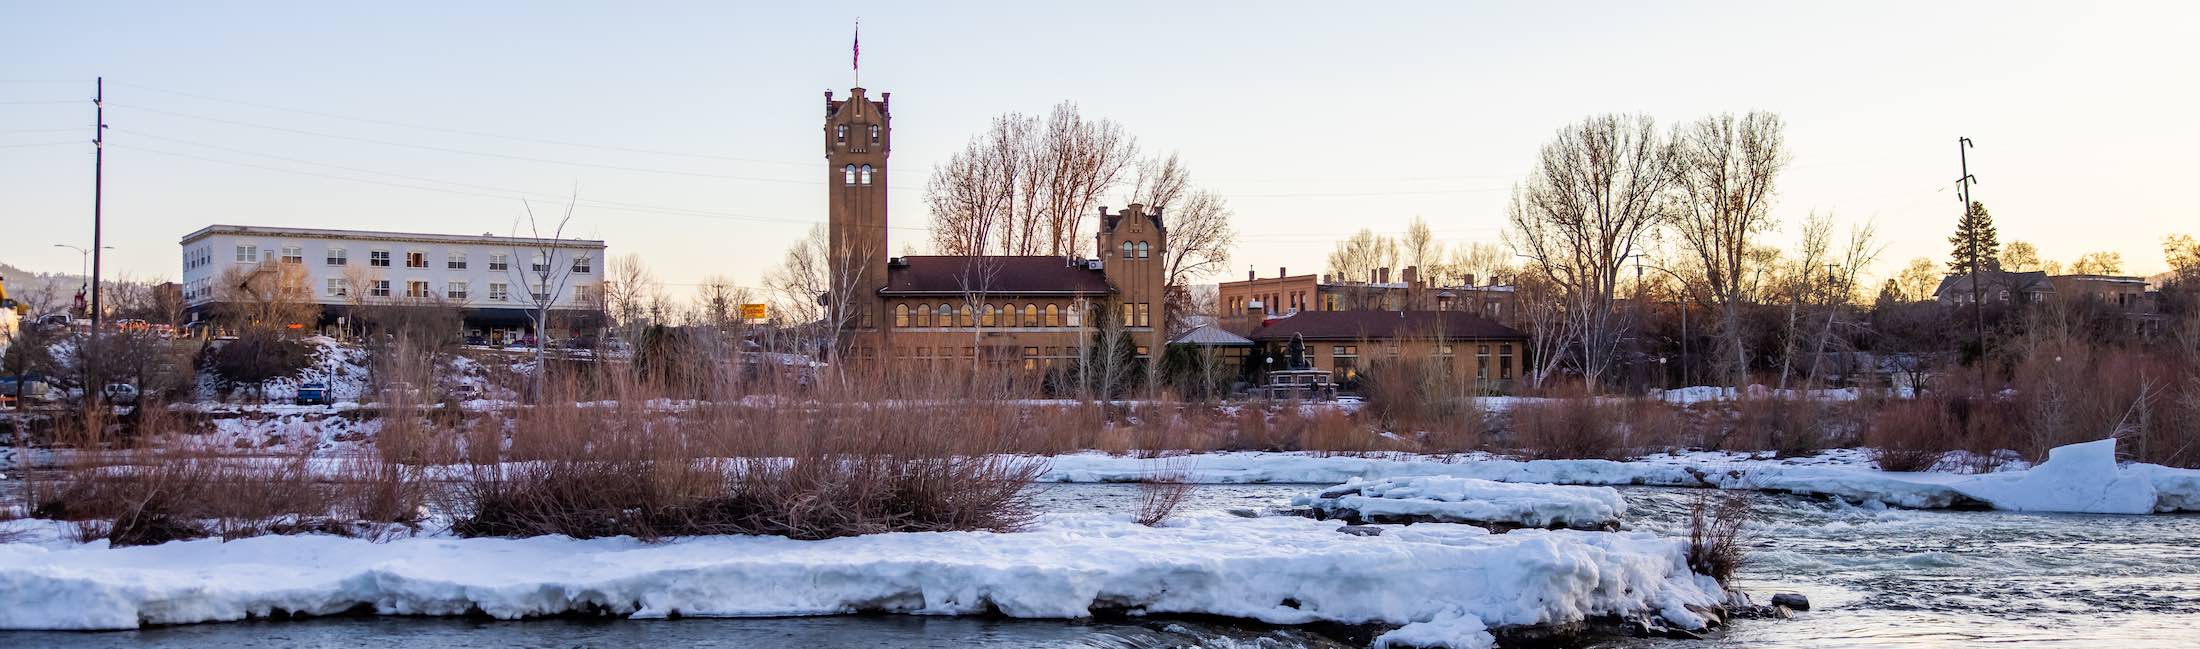 Missoula Wins Best Holiday River Town in the US